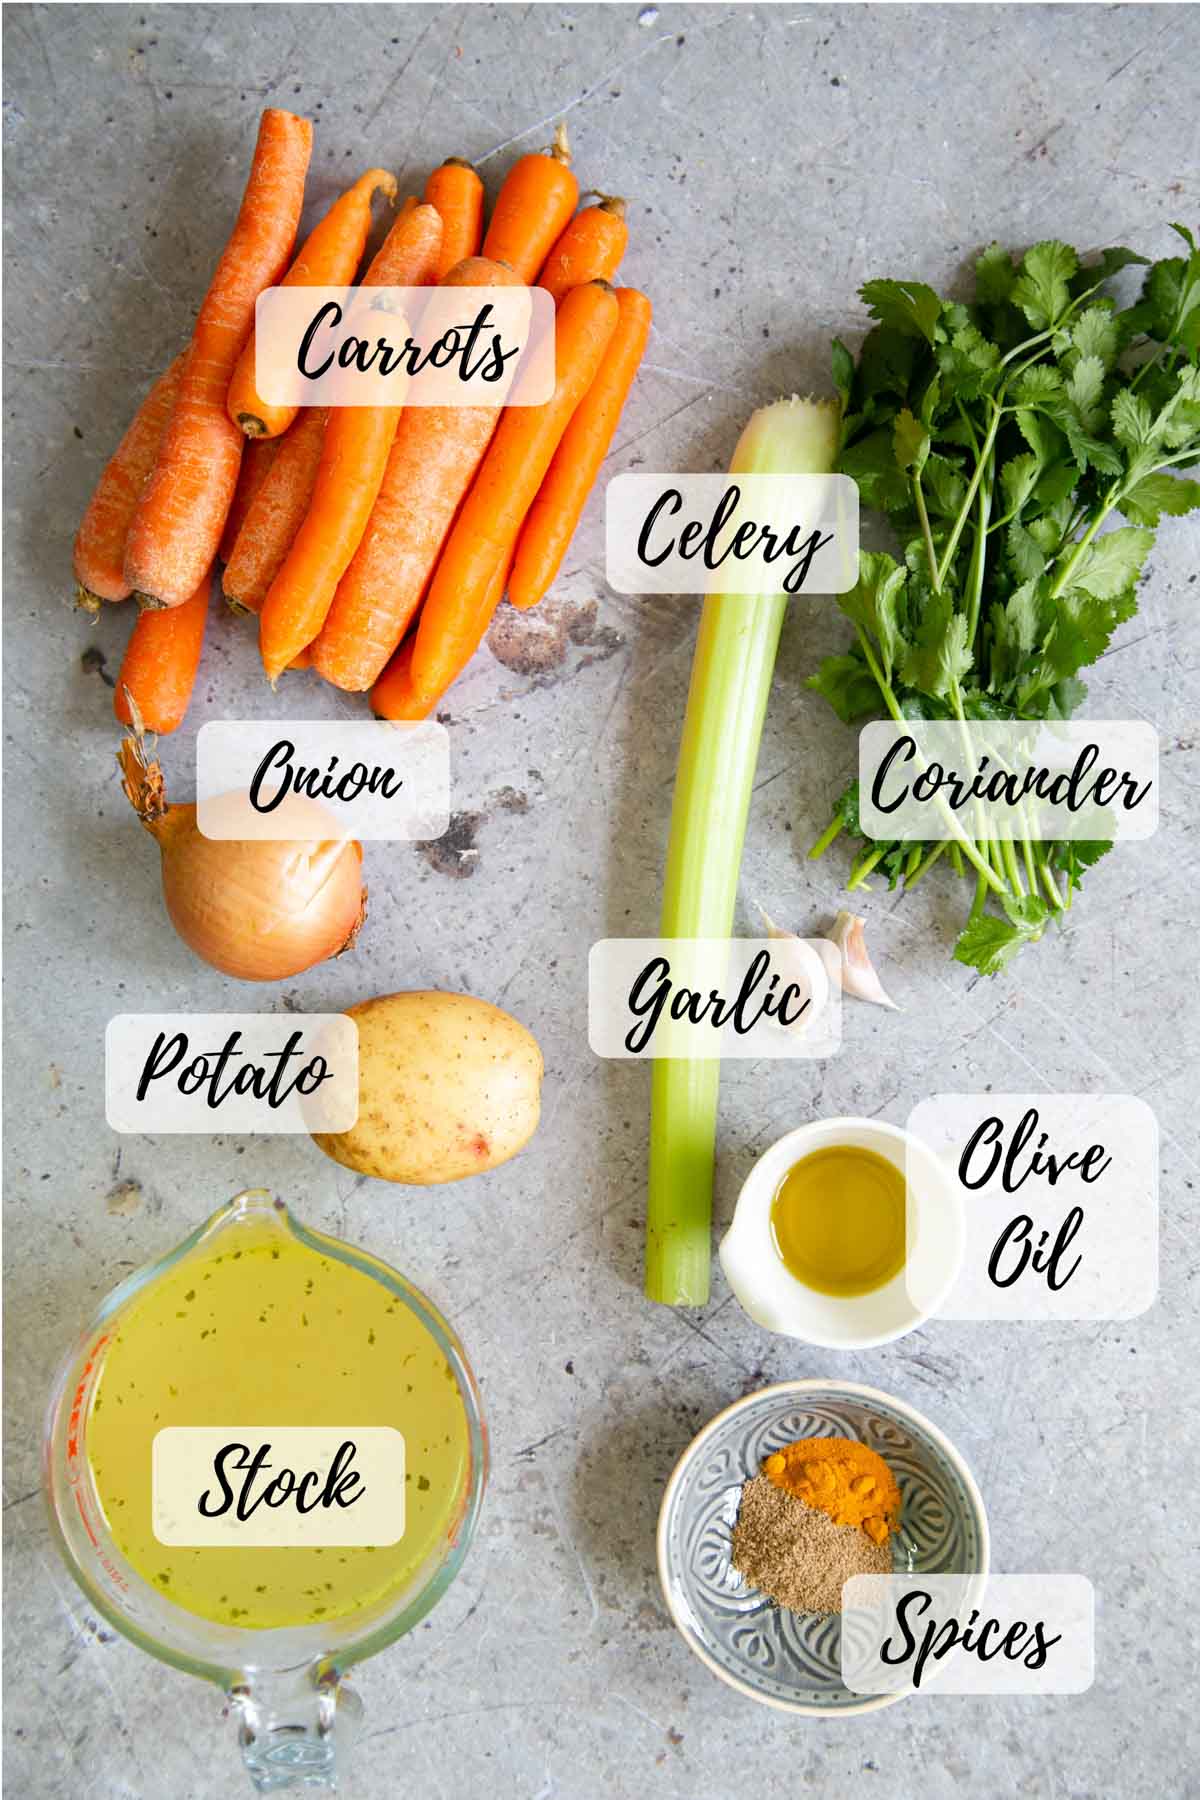 The ingredients: carrots, celery, coriander, ollive oil, spices, stock, a potato, an onion.